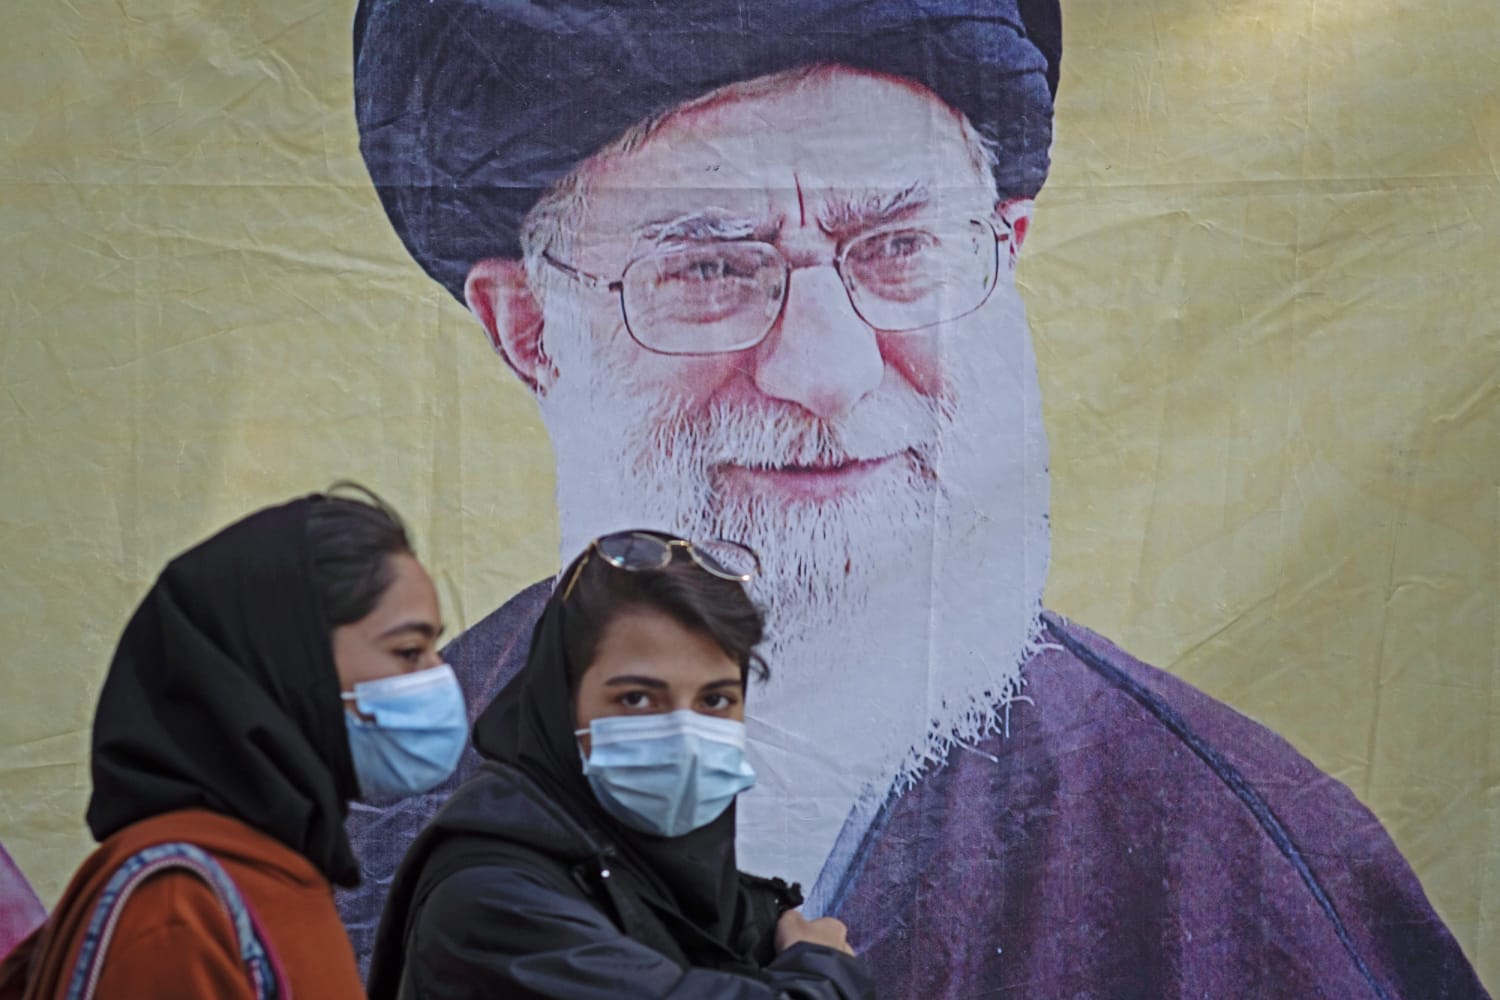 Iran’s supreme leader hints at loosening hijab rules after months of protests over young woman’s death